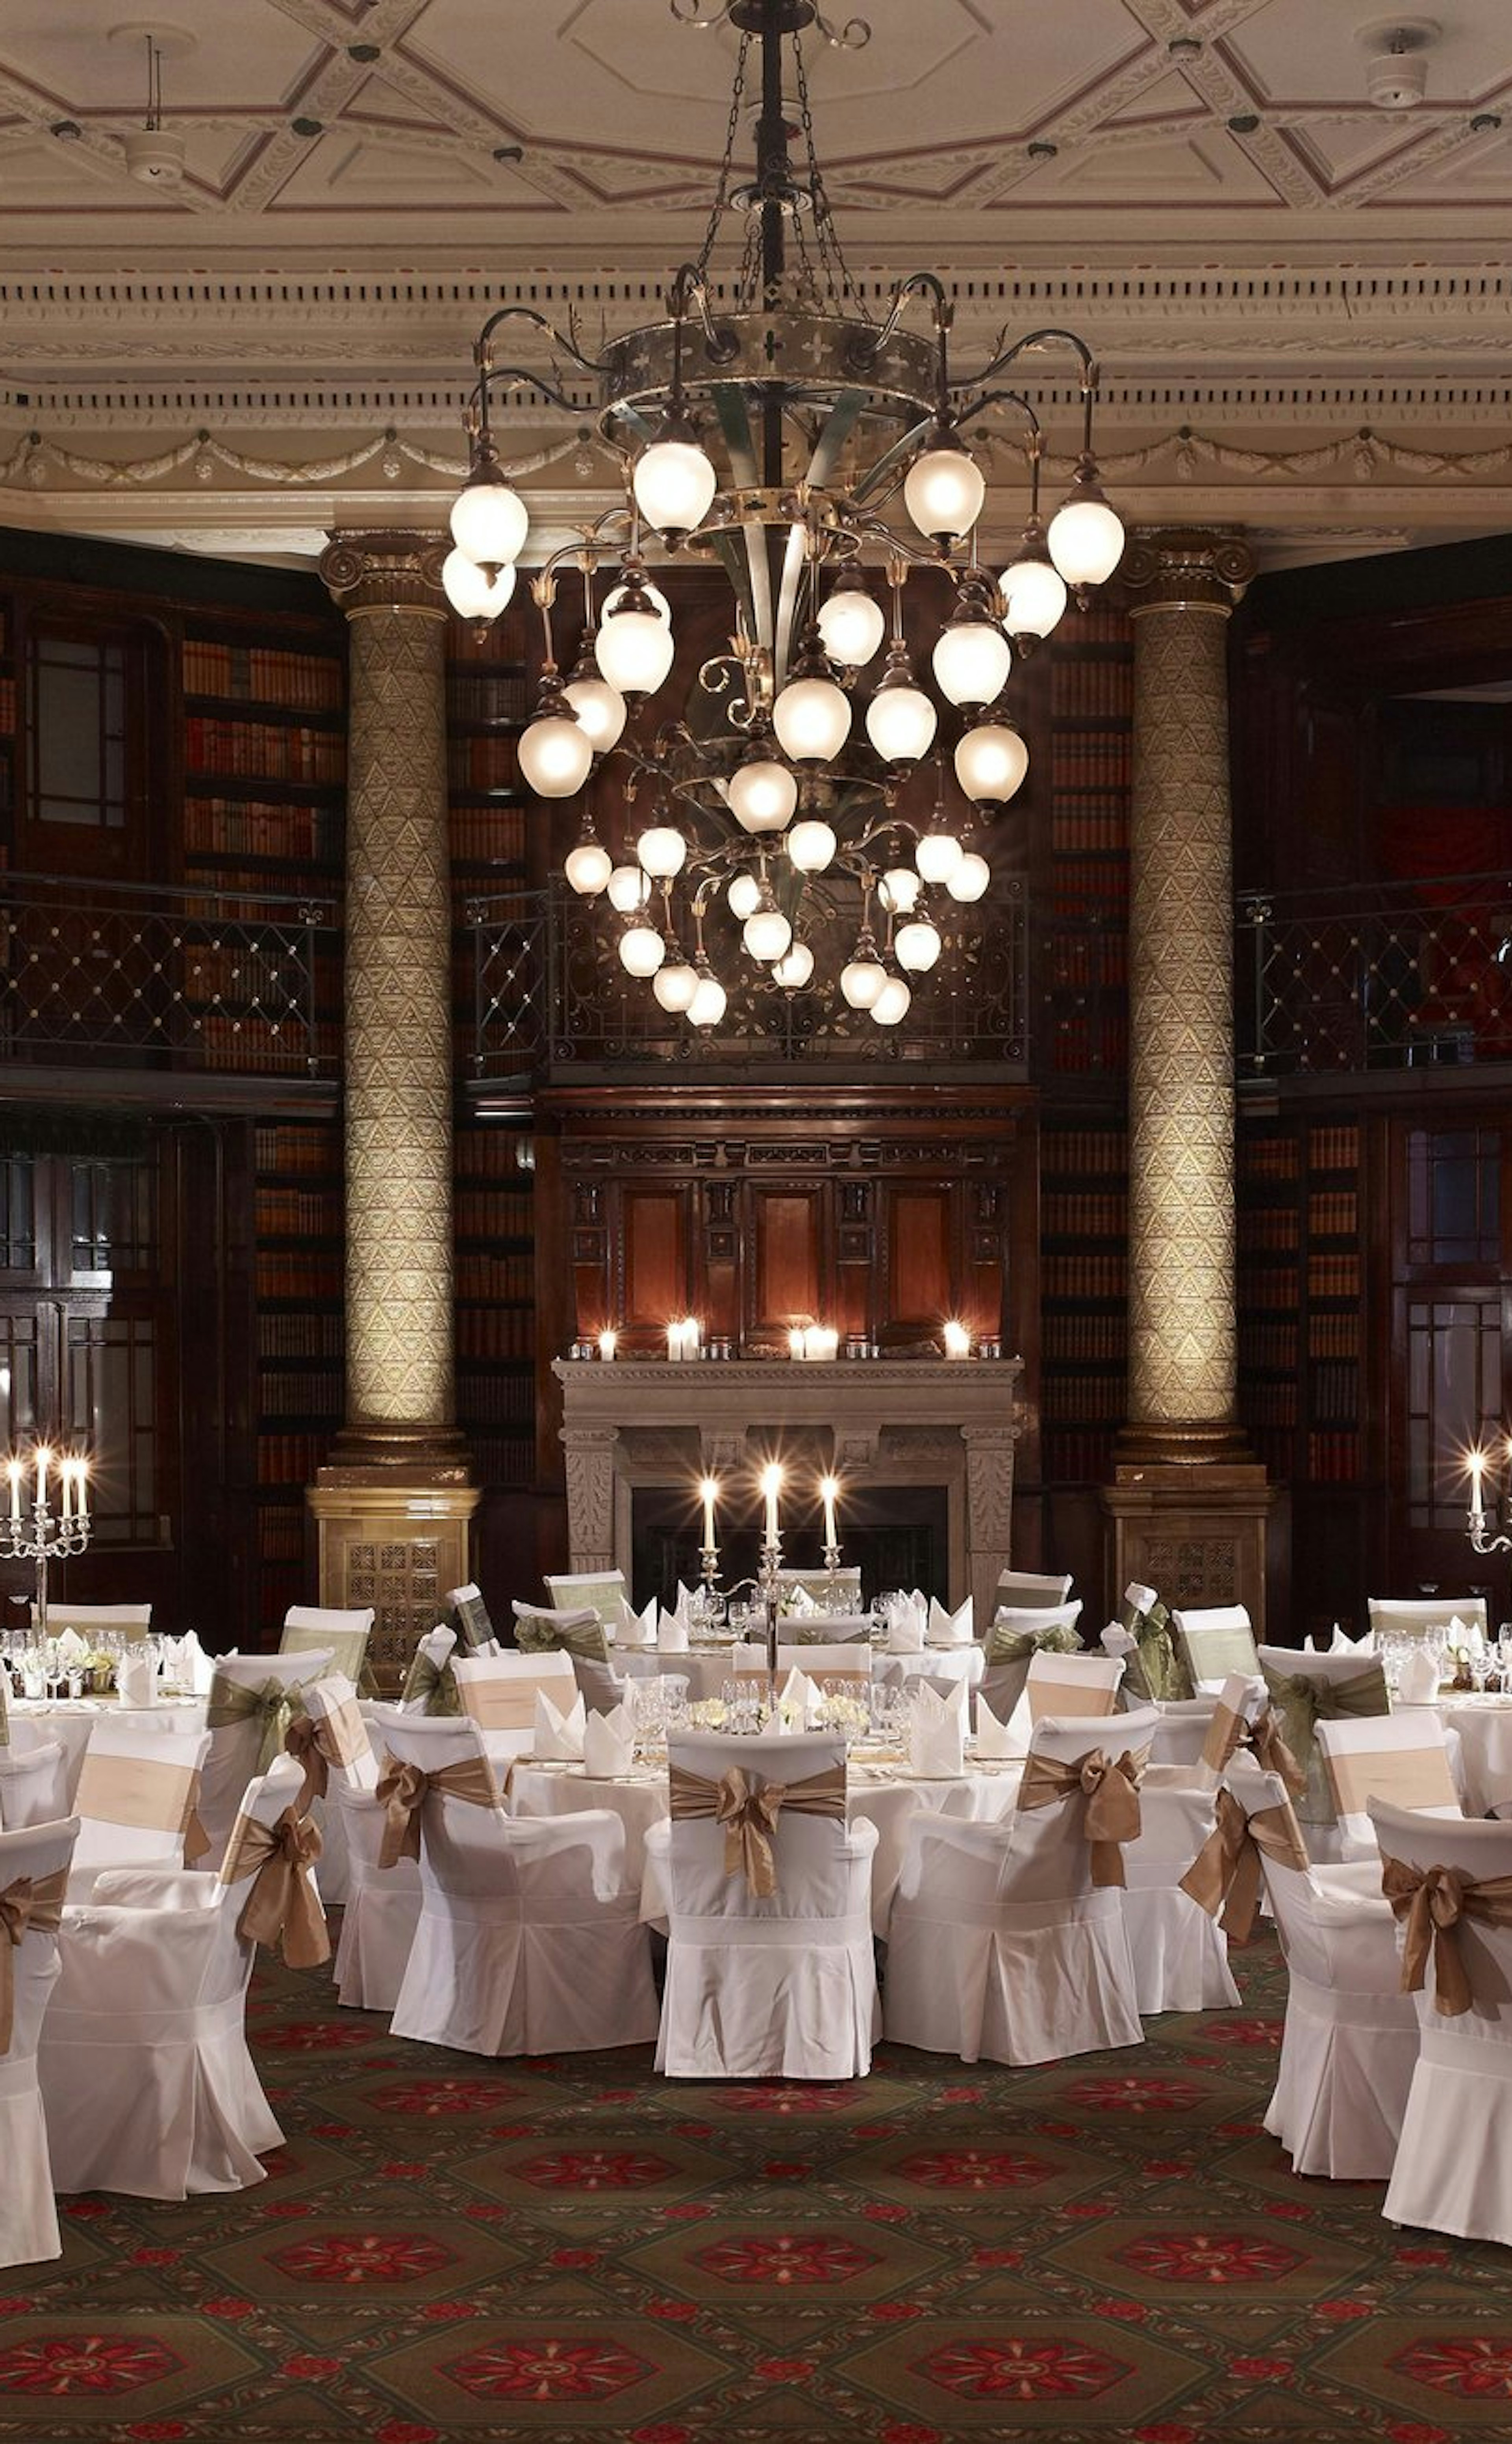 Christmas Party Venues - The Royal Horseguards Hotel and One Whitehall Place